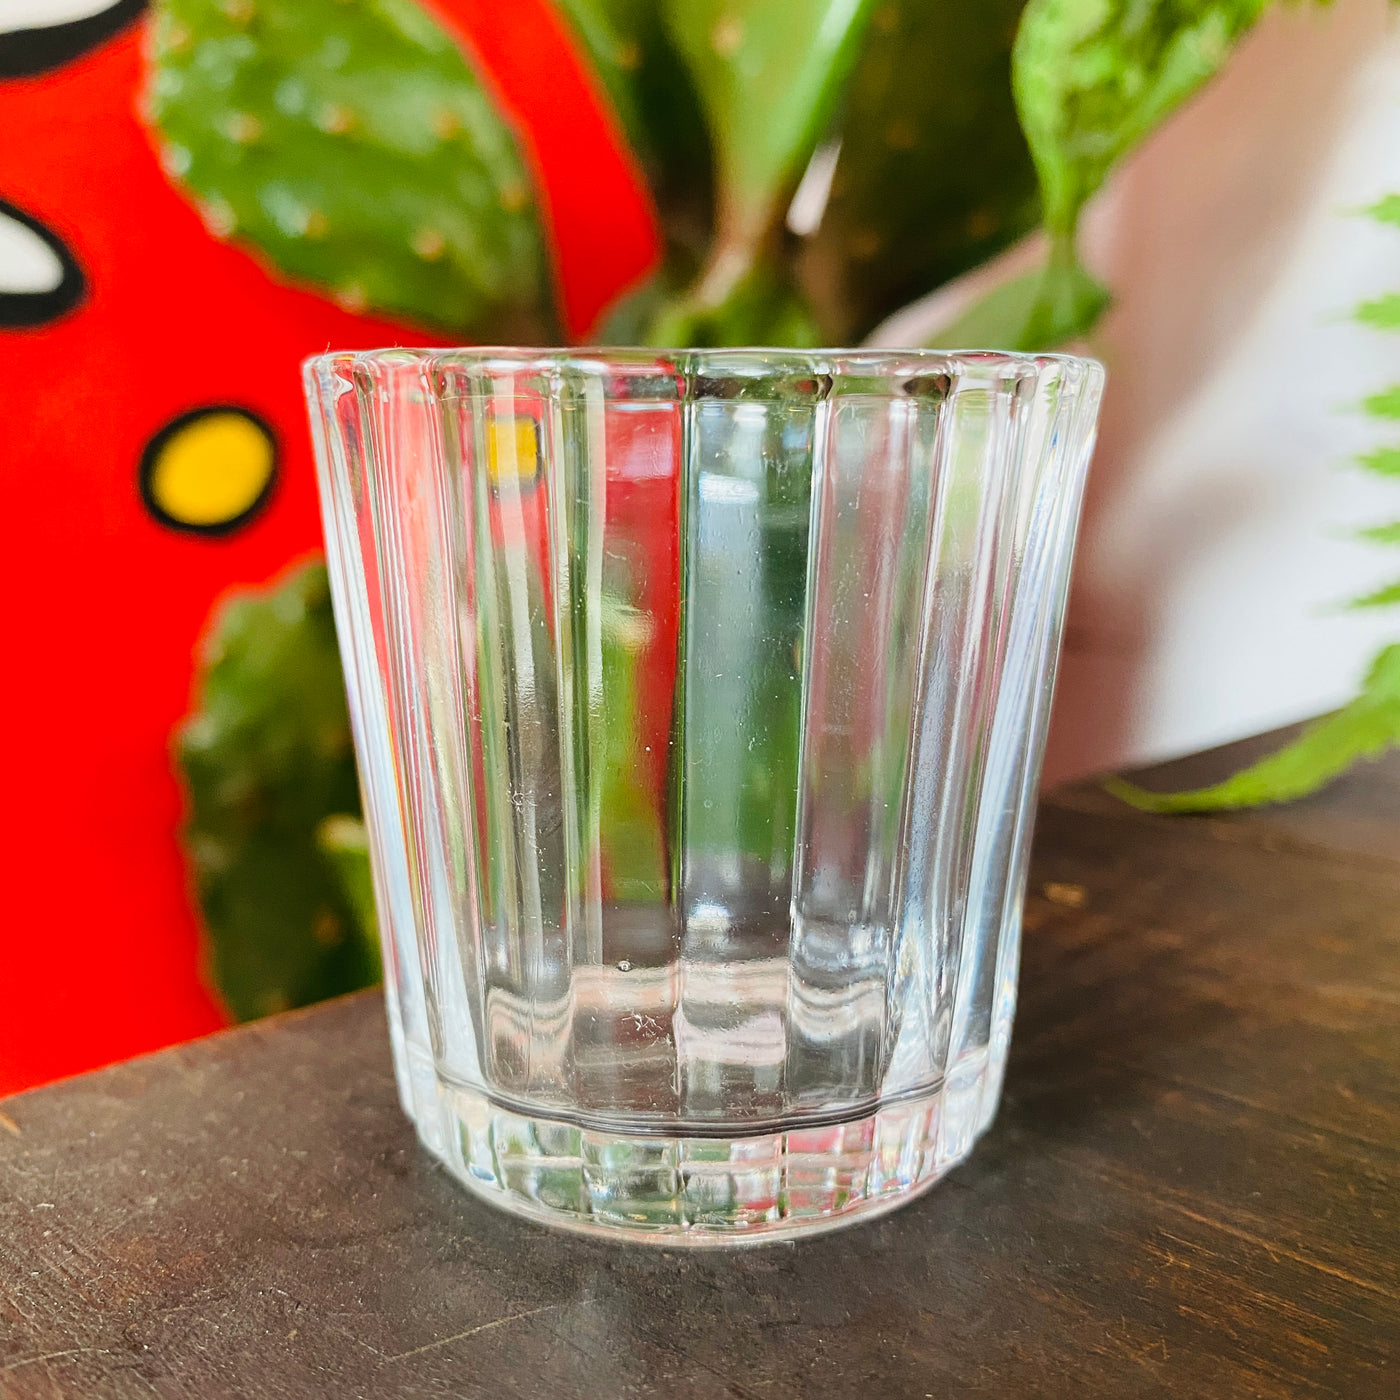 Clear scalloped shot glass pictured on dark wooden table with cactus in the background.